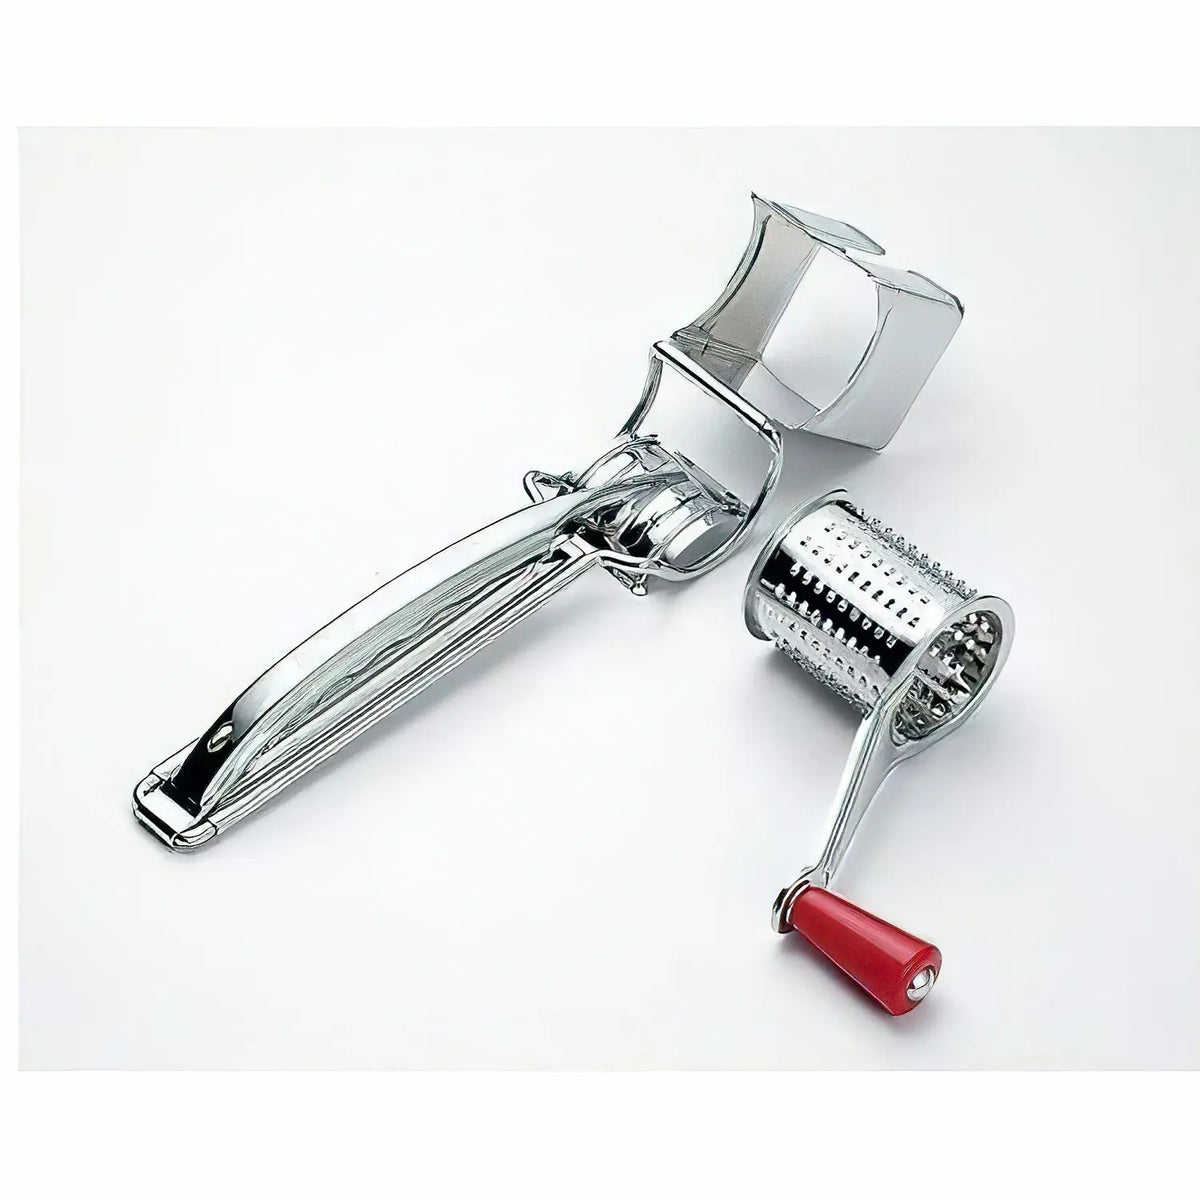 commercial Stainless Steel Rotary Cheese Grater